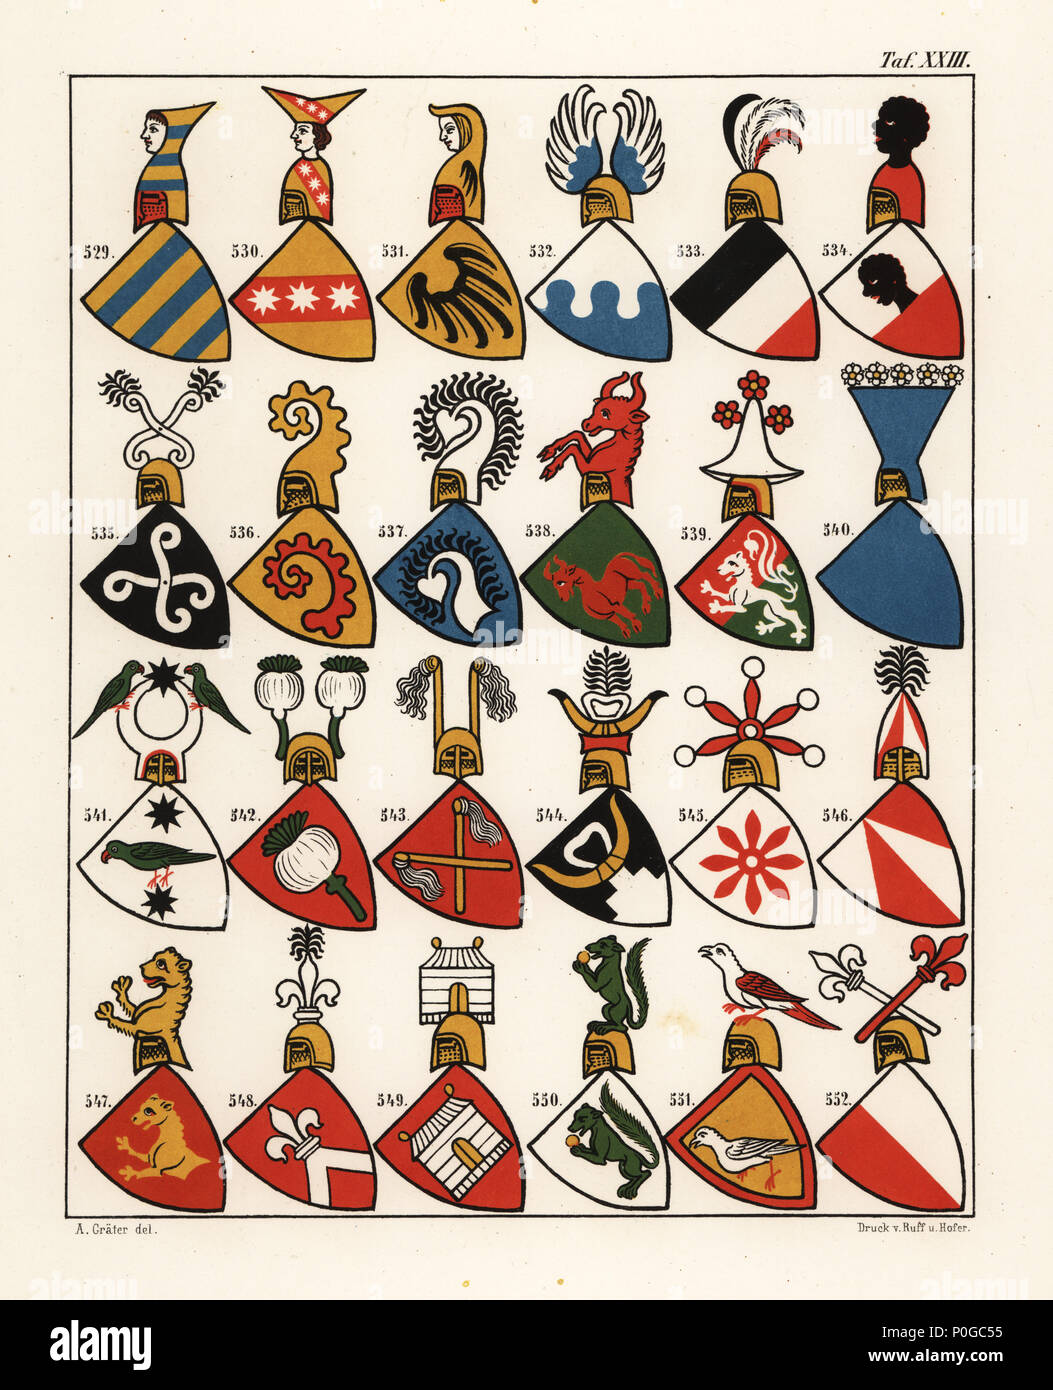 Swiss coats of arms, c. 1340. Chromolithograph by A. Graeter from Die Wappenrolle von Zurich, The Zurich Armorial, Antiquarische Gesellschaft in Zurich, 1860. Reprint of a 14th century manuscript roll of arms showing the heraldry of the Holy Roman Empire with 559 coats of arms and 28 flags of bishoprics in Switzerland. Stock Photo